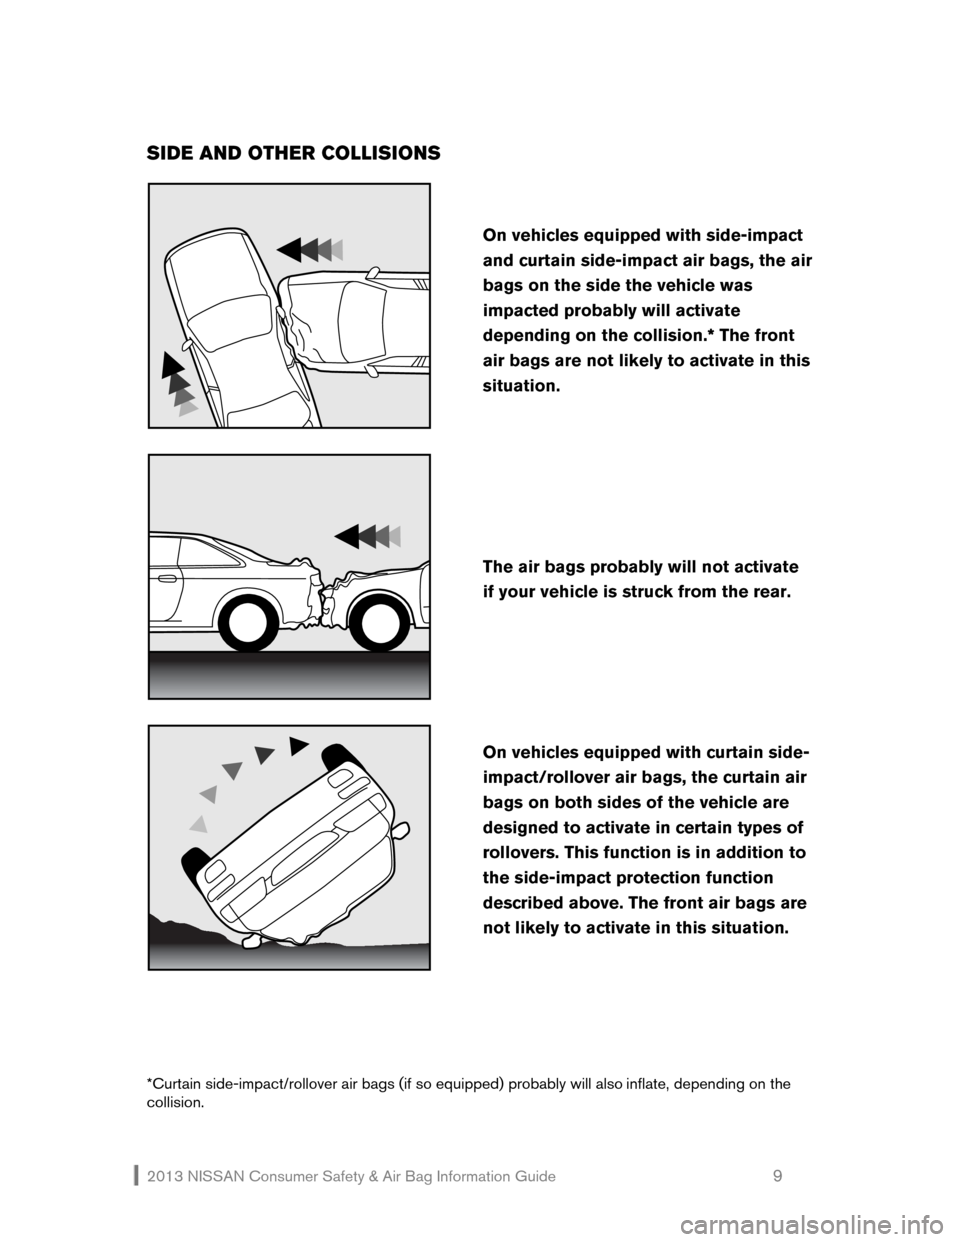 NISSAN XTERRA 2013 N50 / 2.G Consumer Safety Air Bag Information Guide 2013 NISSAN Consumer Safety & Air Bag Information Guide                                                   9 
SIDE AND OTHER COLLISIONS 
 
 
 
 
 
*Curtain side-impact/rollover air bags (if so equipped